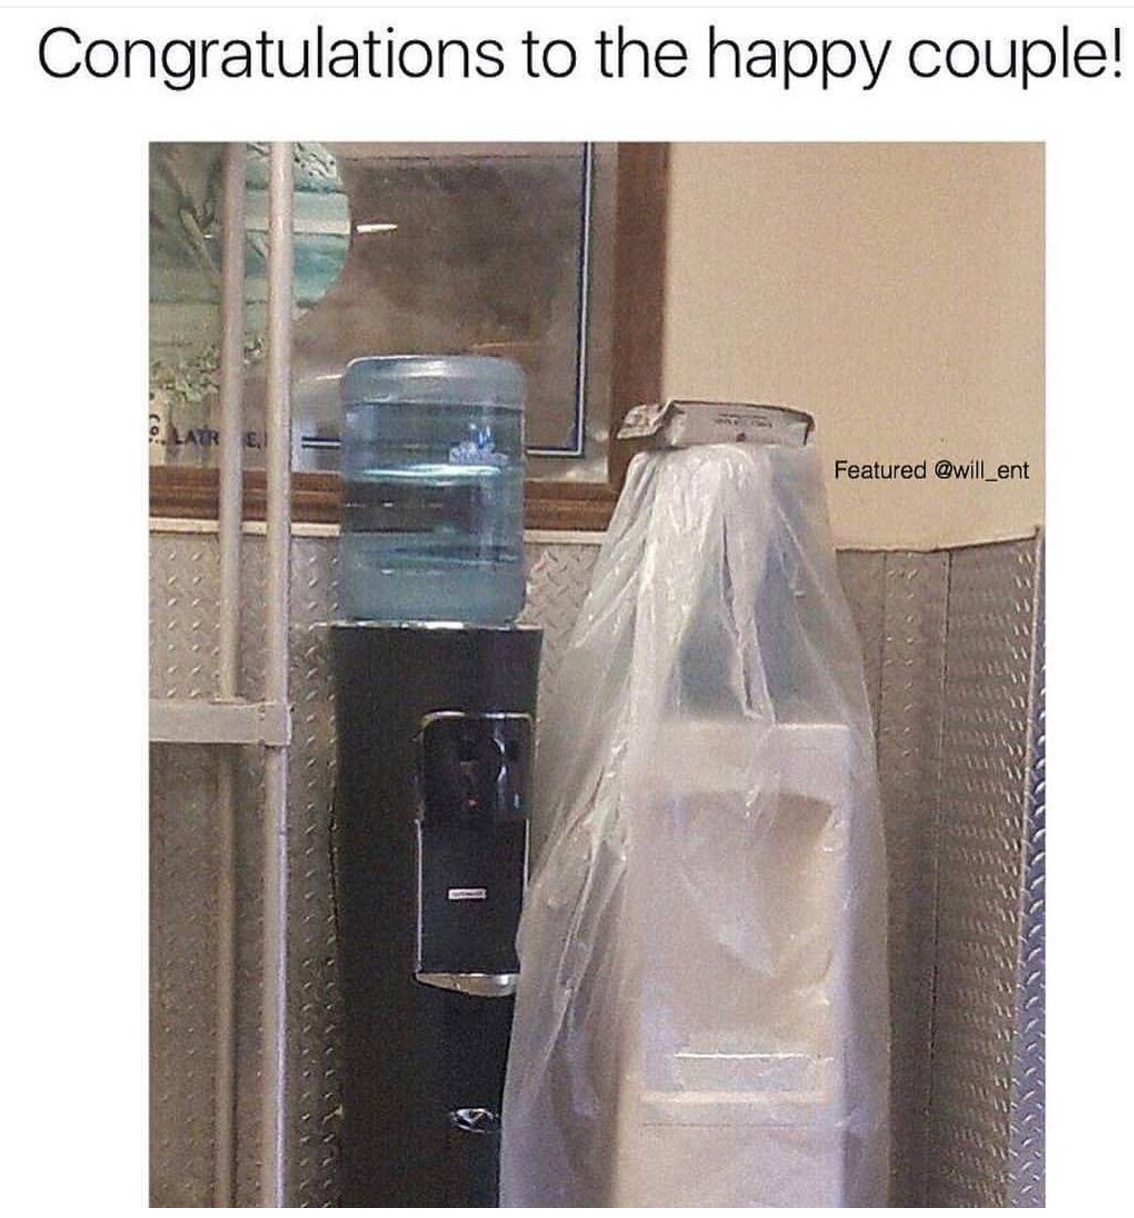 water cooler so happy for them - Congratulations to the happy couple! Featured